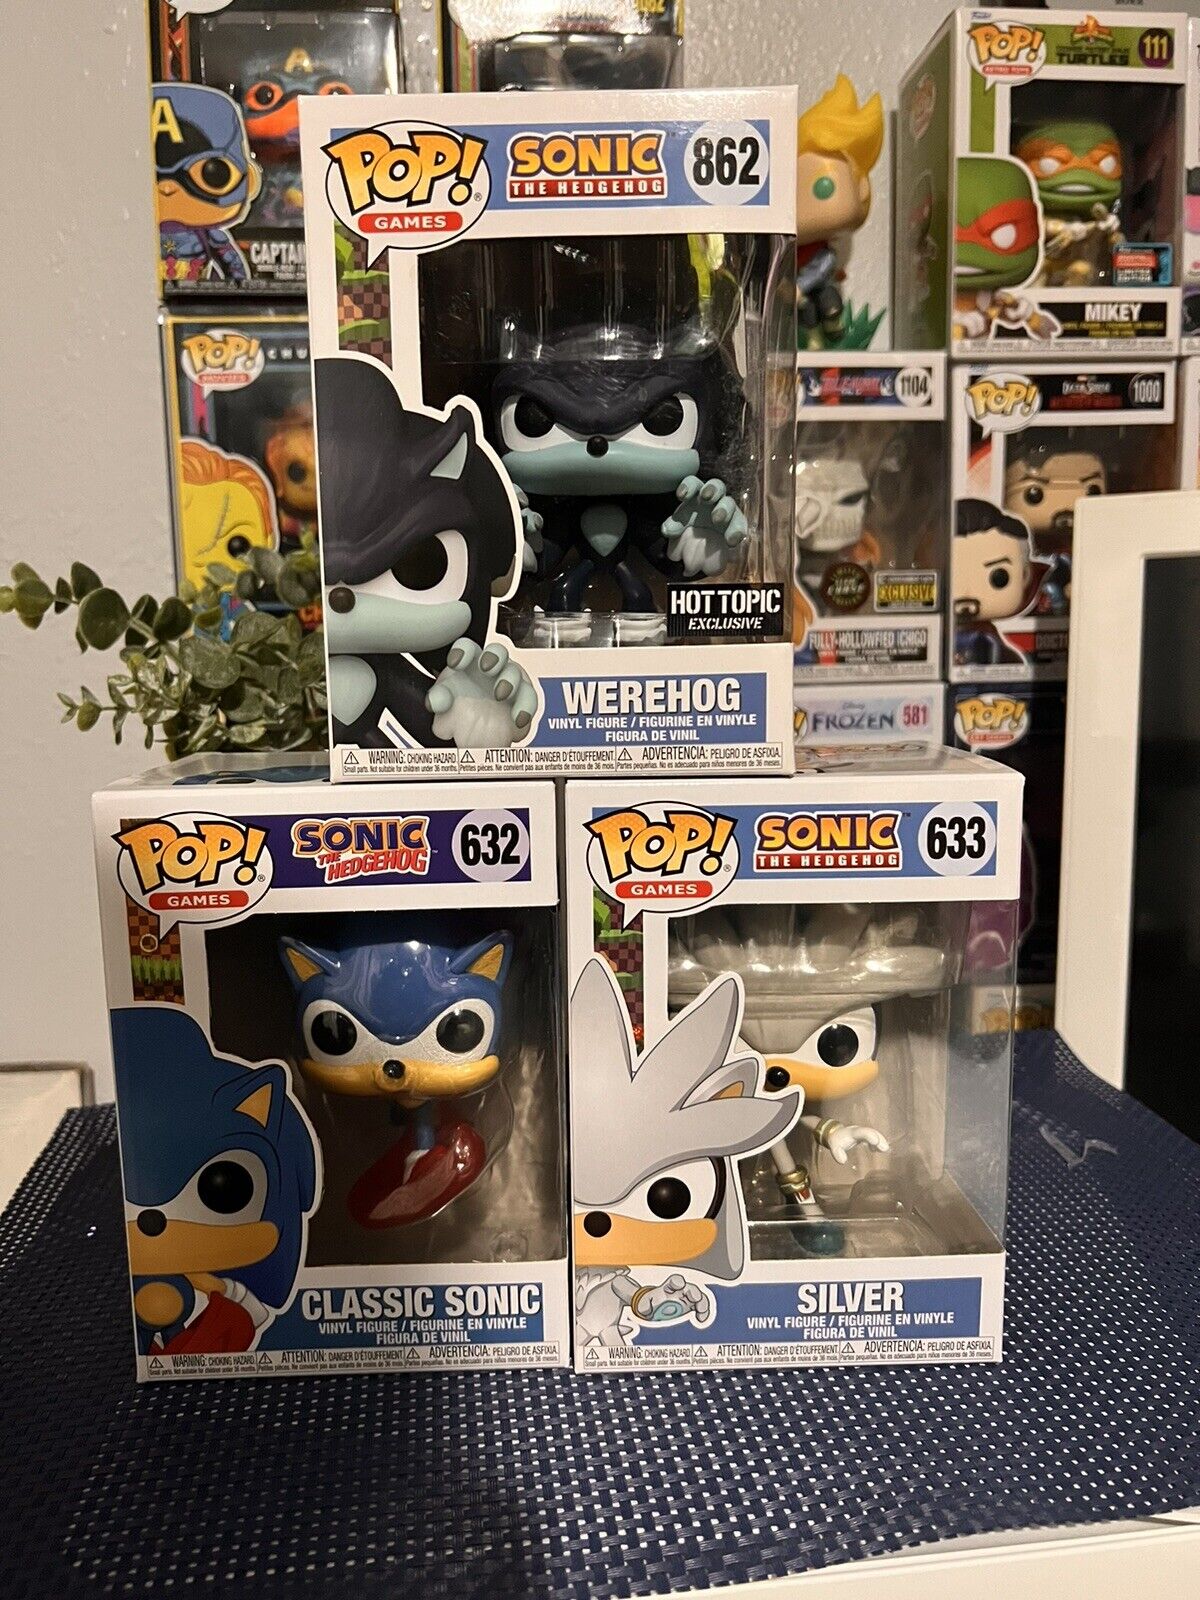 Sonic Unleashed Shadow the Hedgehog Action & Toy Figures Funko